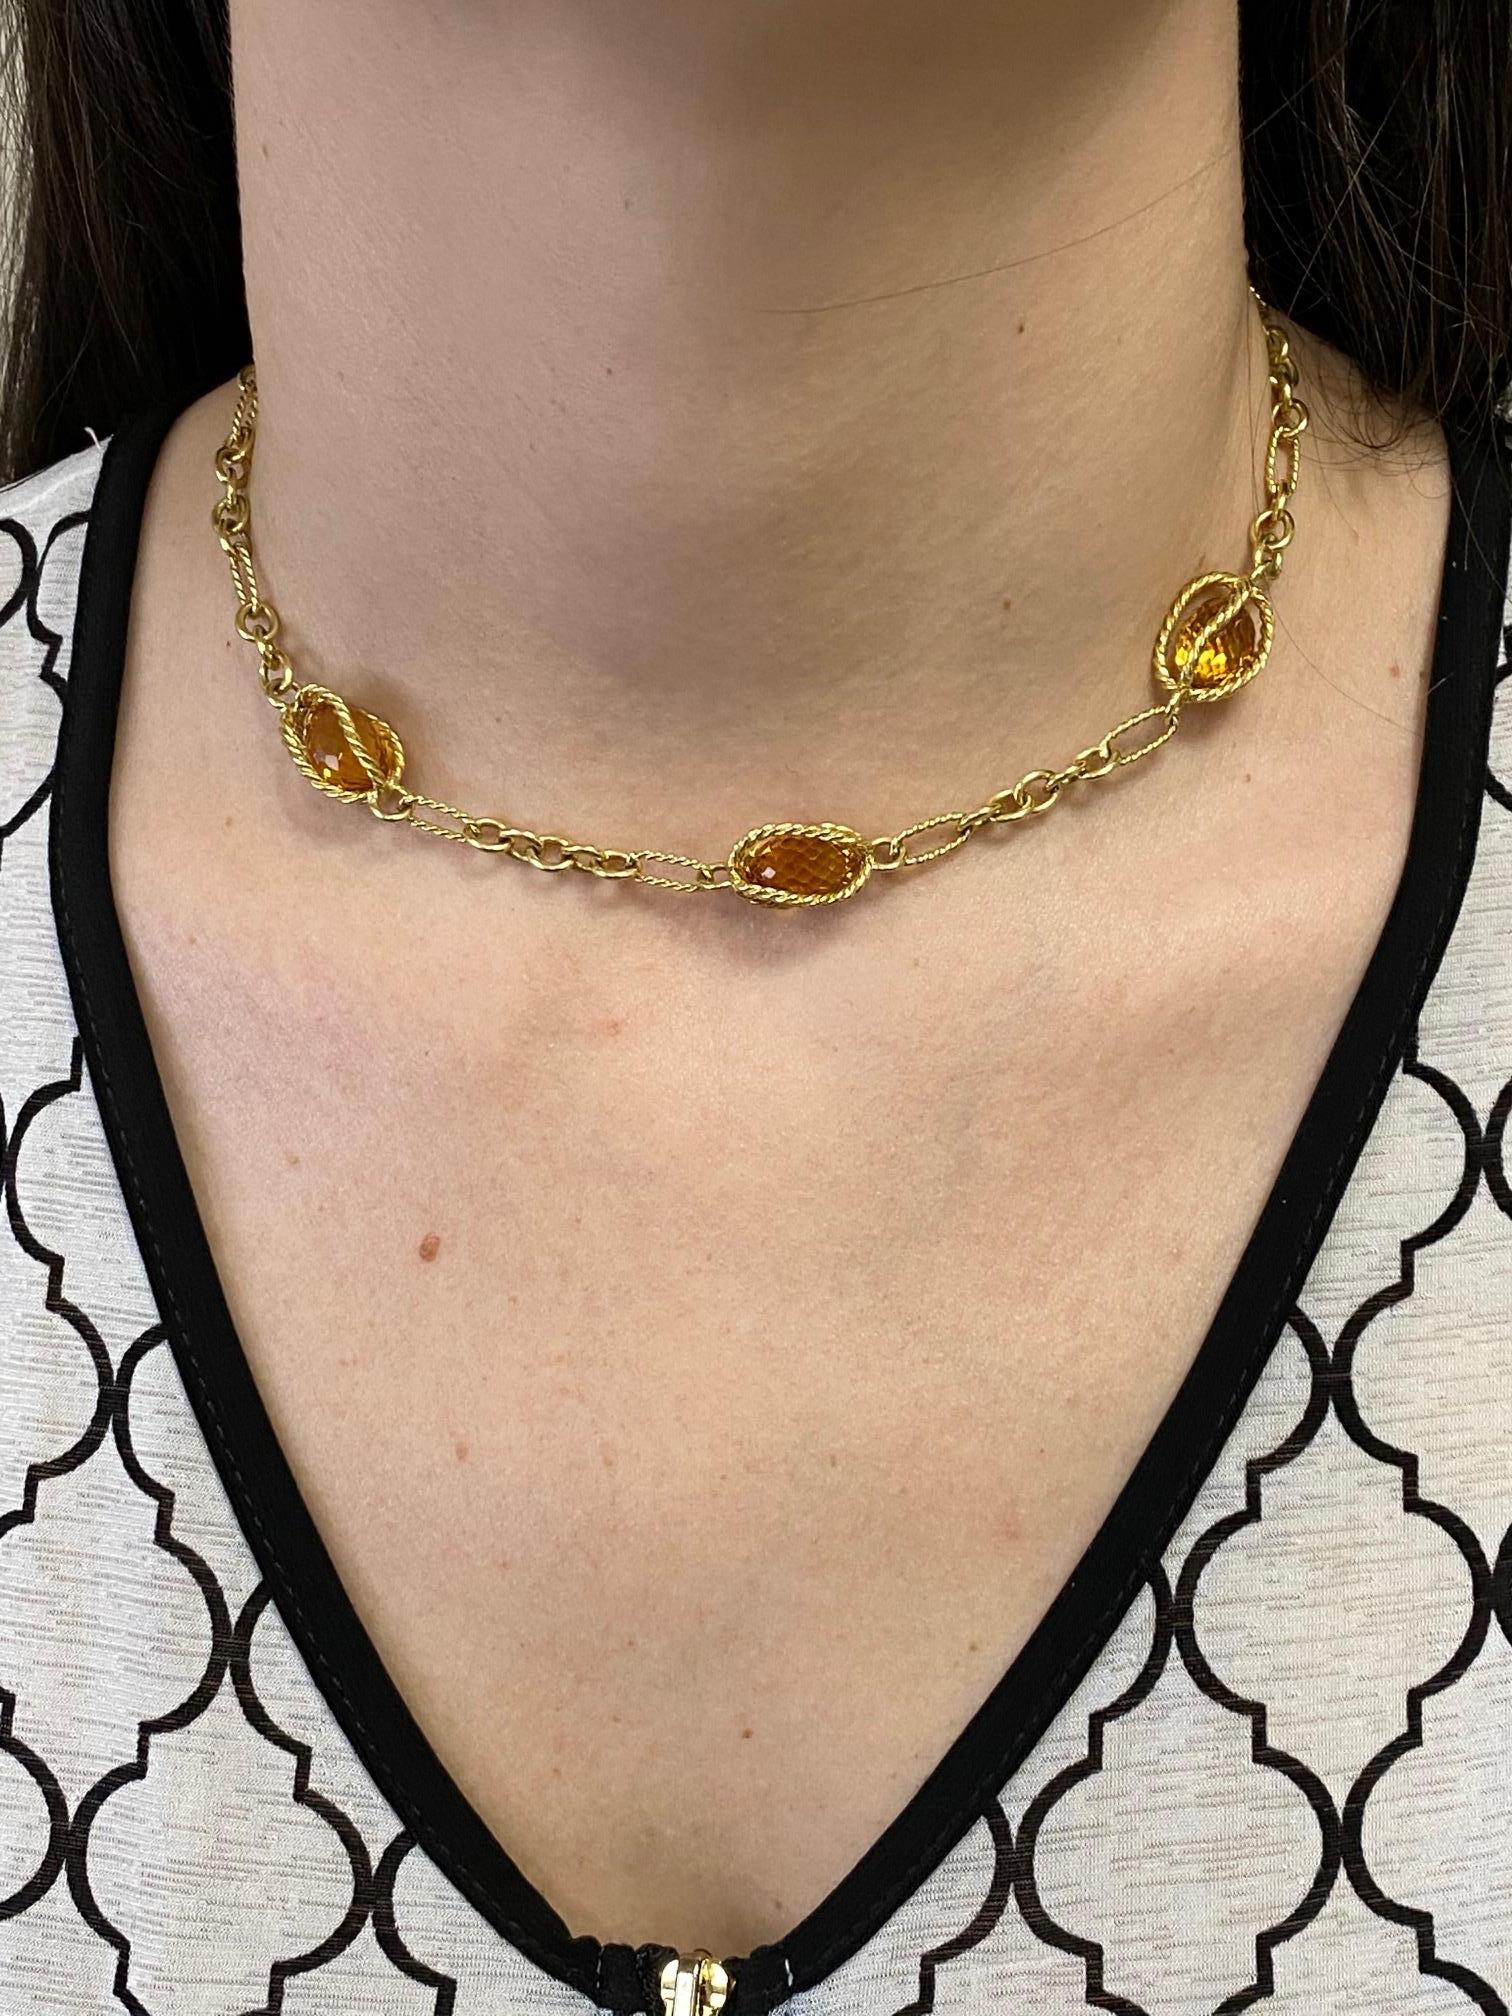 David Yurman Citrine Briolettes Toggle Necklace in 18 Karat Yellow Gold In Excellent Condition For Sale In San Diego, CA